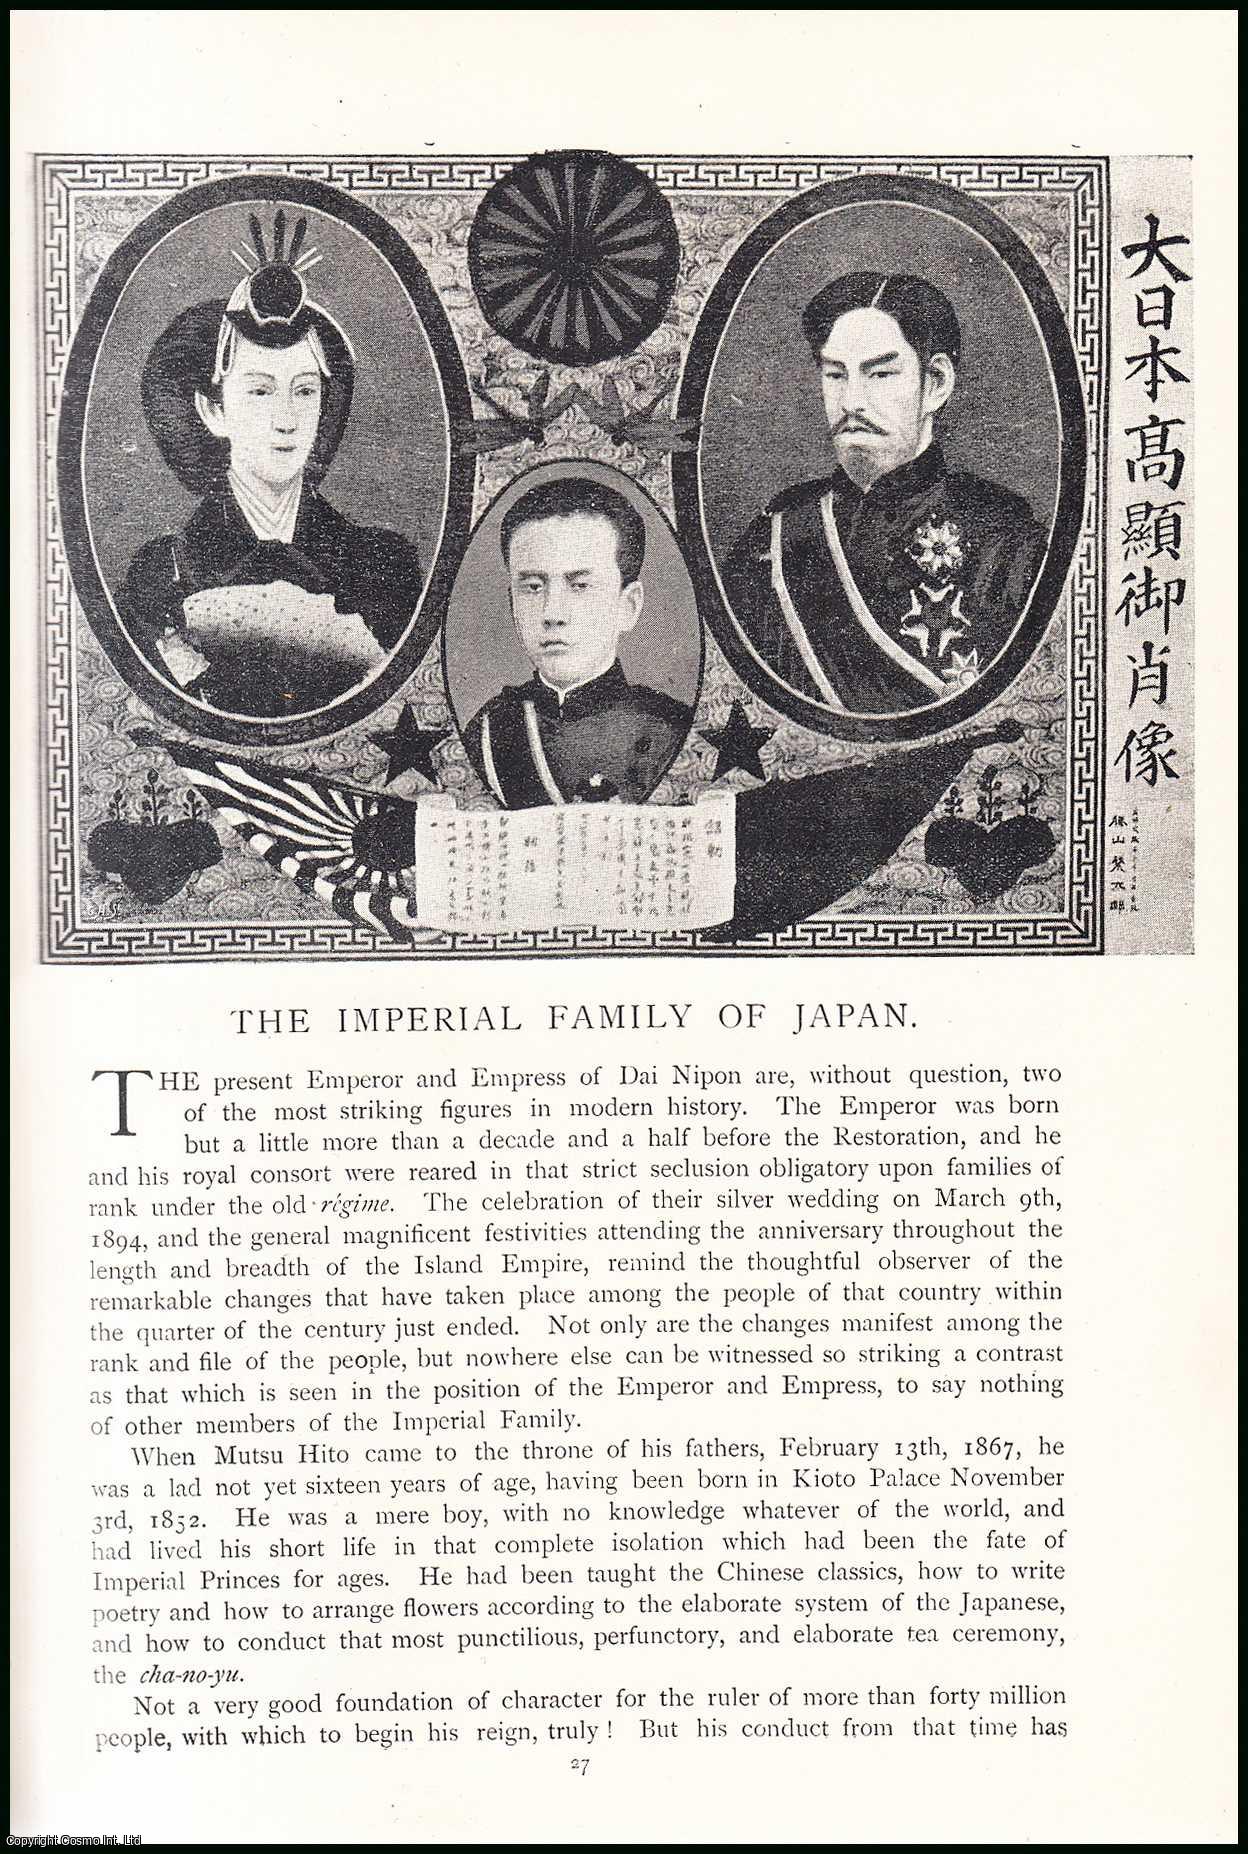 Laura B. Starr - The Imperial Family of Japan. An uncommon original article from the Pall Mall Magazine, 1895.